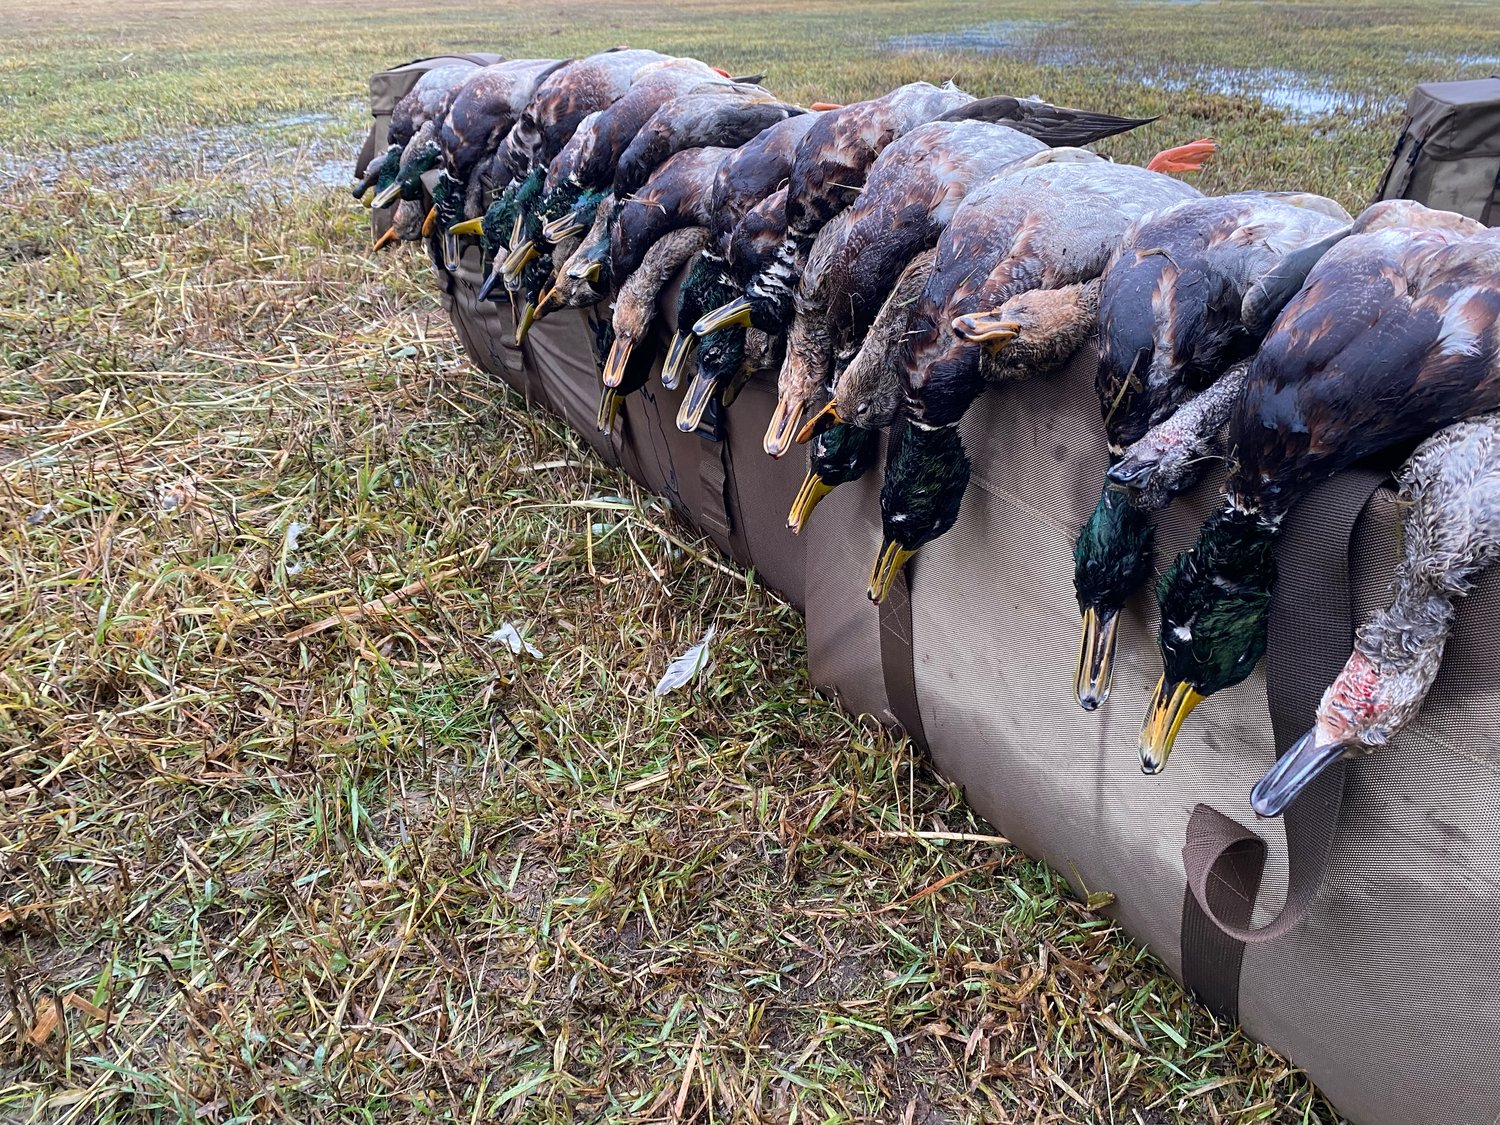 “Post-Thanksgiving duck hunt, tricking some new birds that came down from the rain and wind!” Logan Boone submitted these photos after a hunt in the northwest Centralia area on Nov. 25.